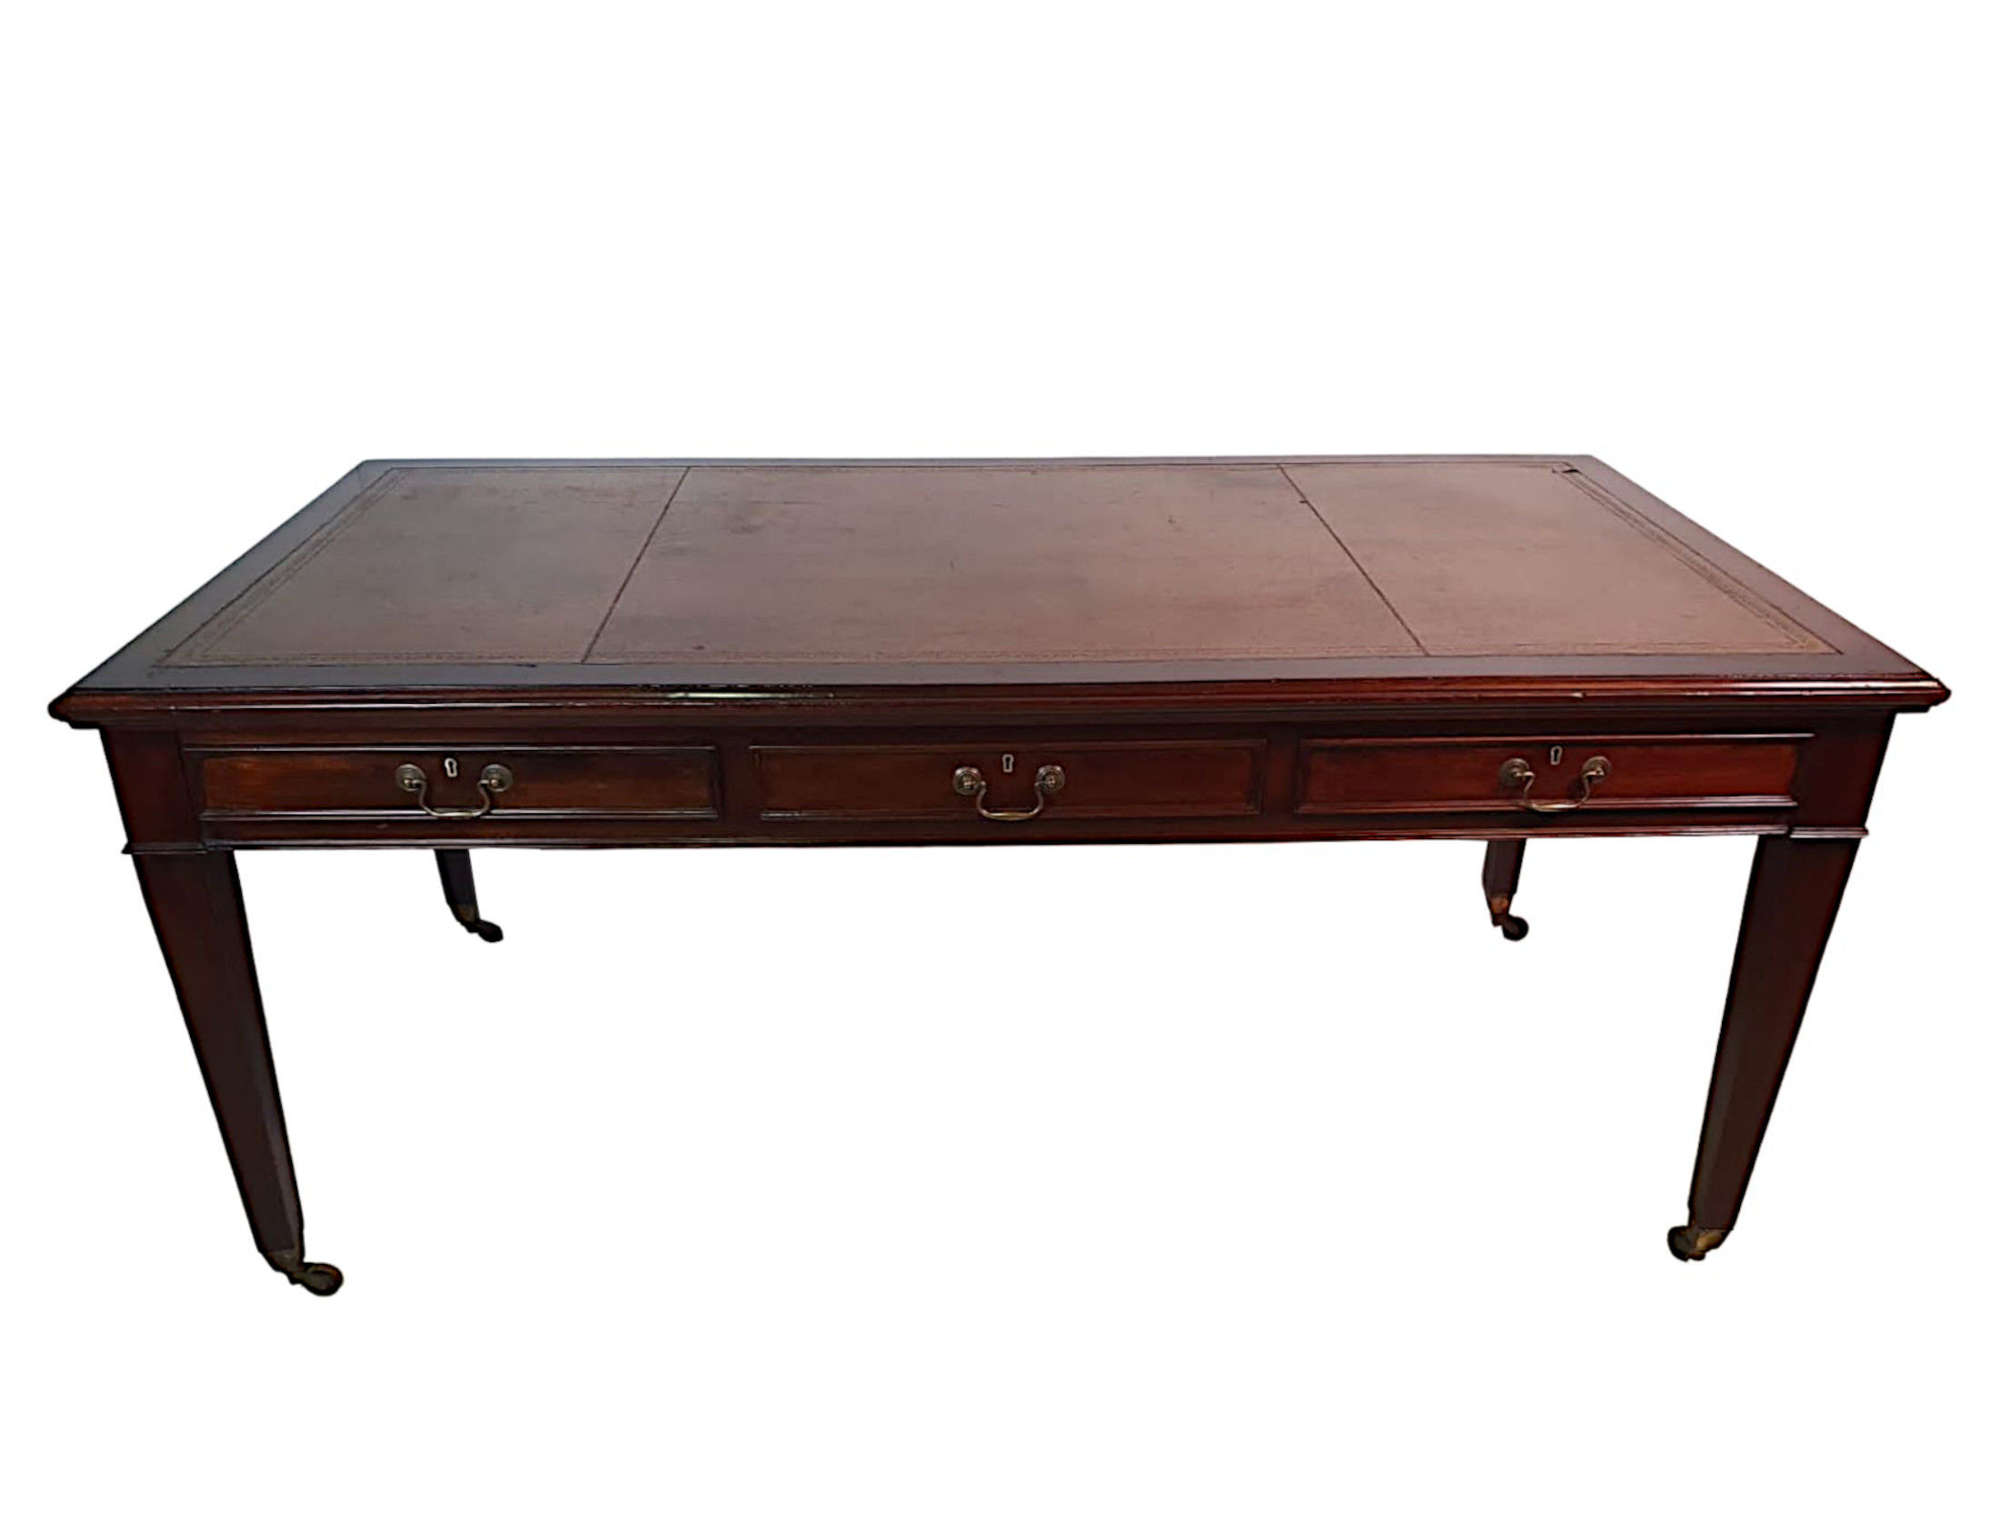 A Very Fine Large Size 19th Century Partners Desk